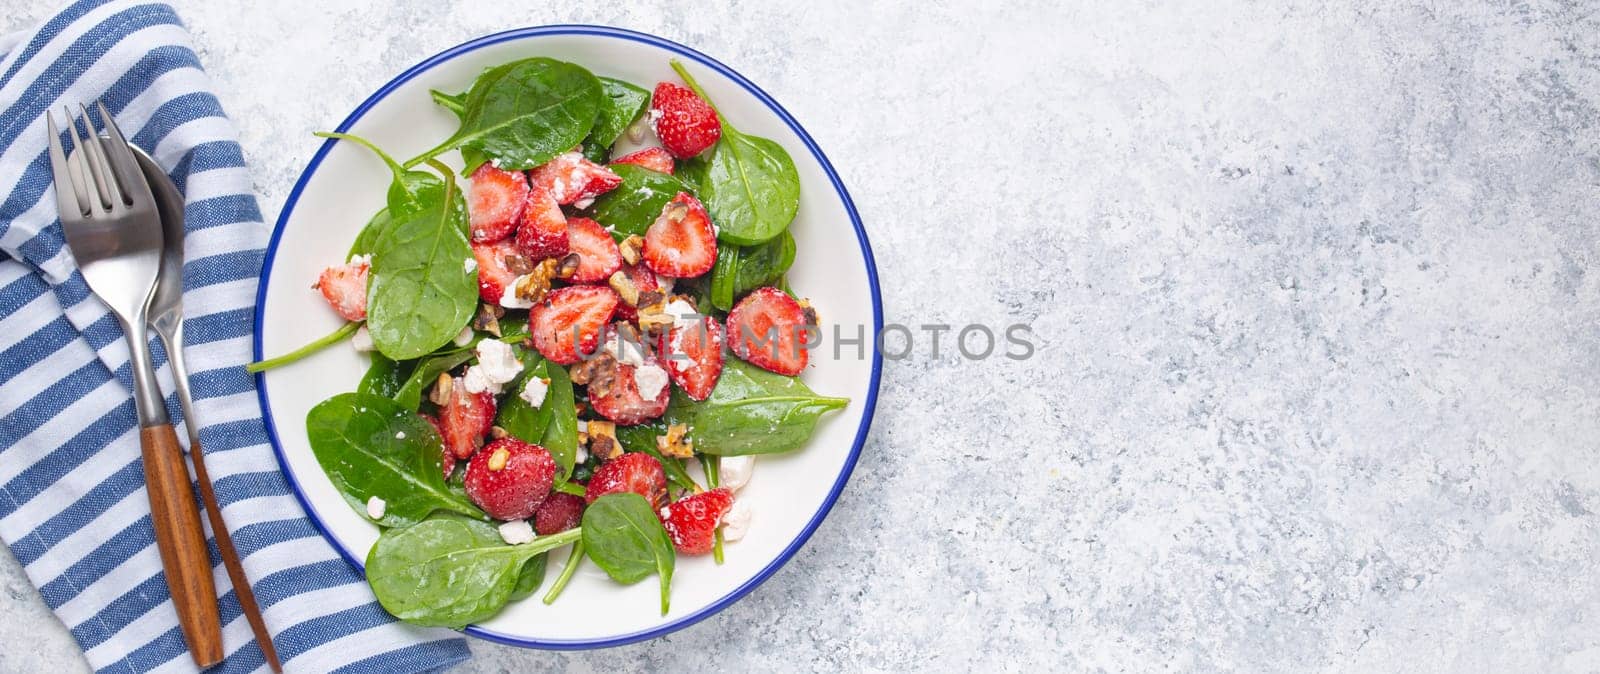 Light Healthy Summer Salad with fresh Strawberries, Spinach, Cream Cheese and Walnuts on White Ceramic Plate, white rustic stone Background Top View, Space For Text. by its_al_dente